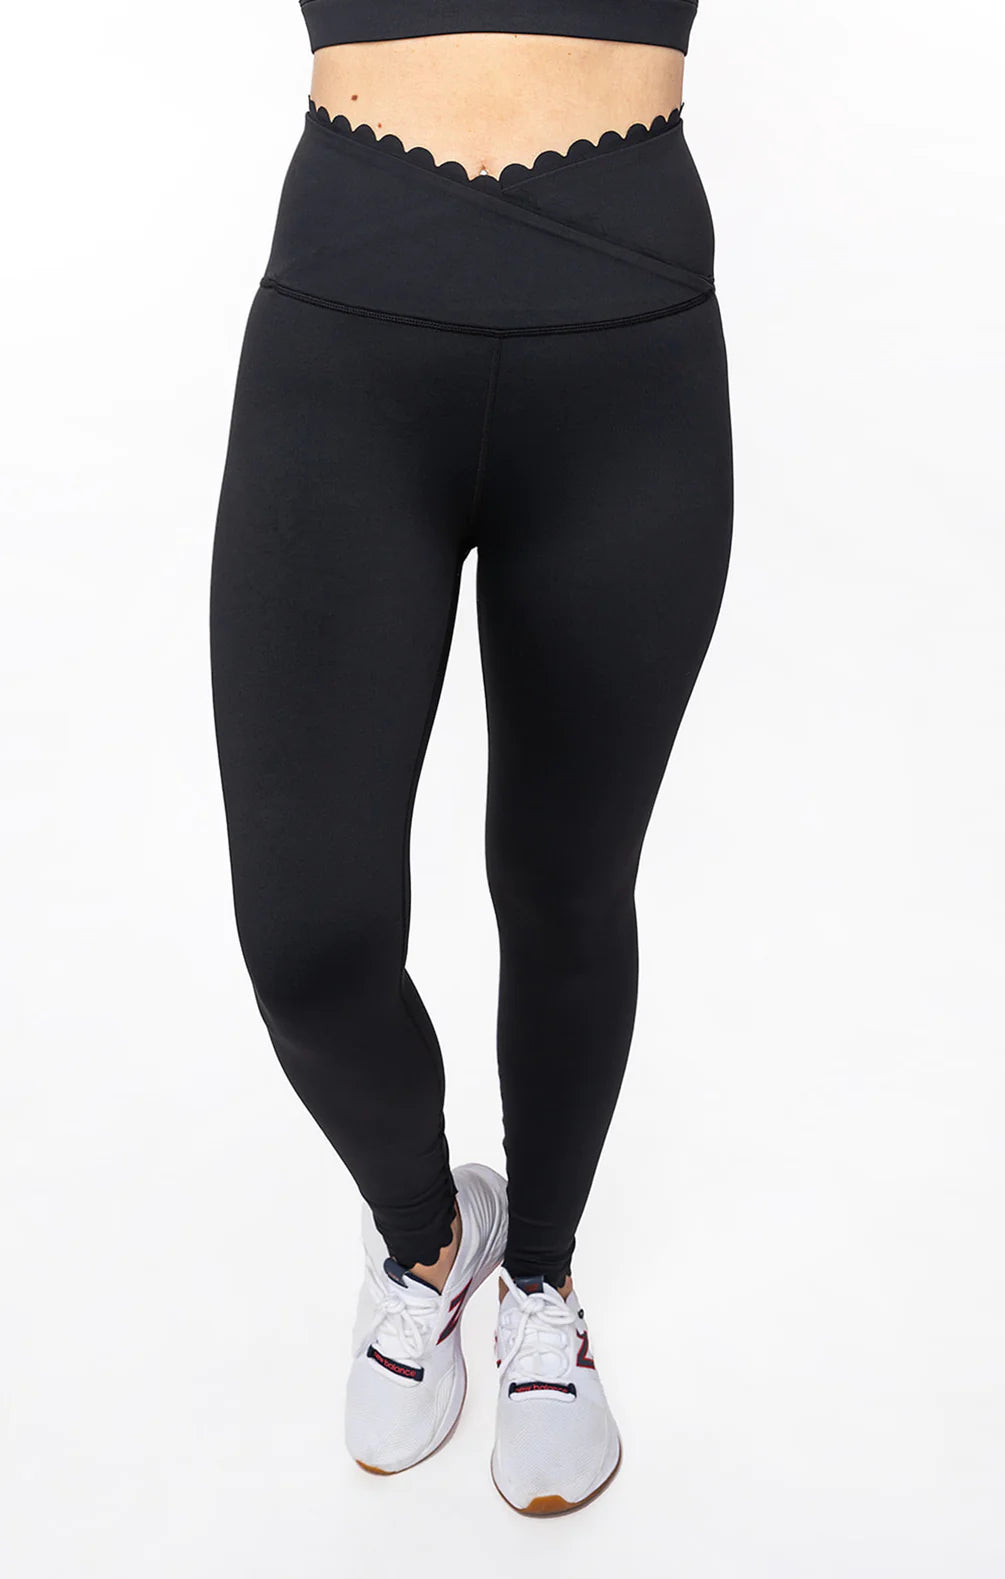 LINC ACTIVE SCALLOPED CROSSOVER LEGGING – Wilkie's Outfitters